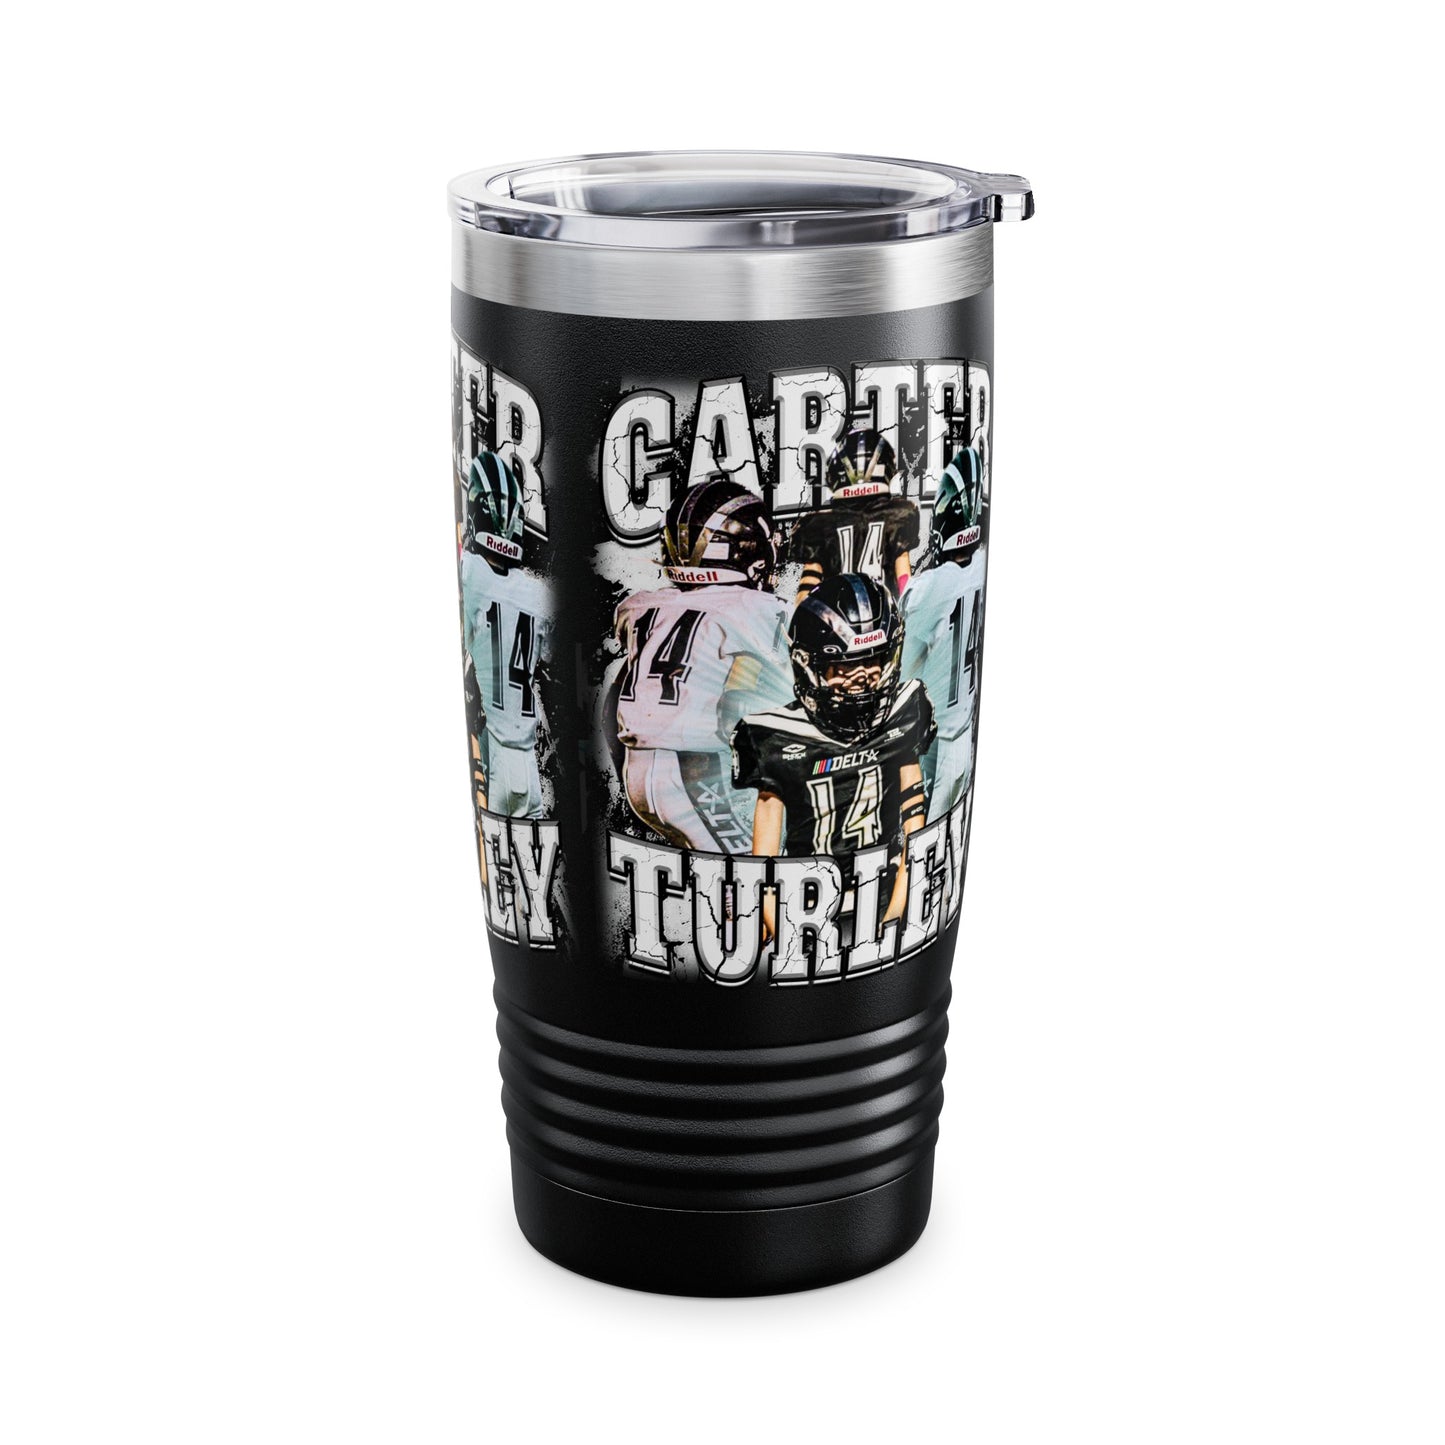 Carter Turley Stainless Steal Tumbler